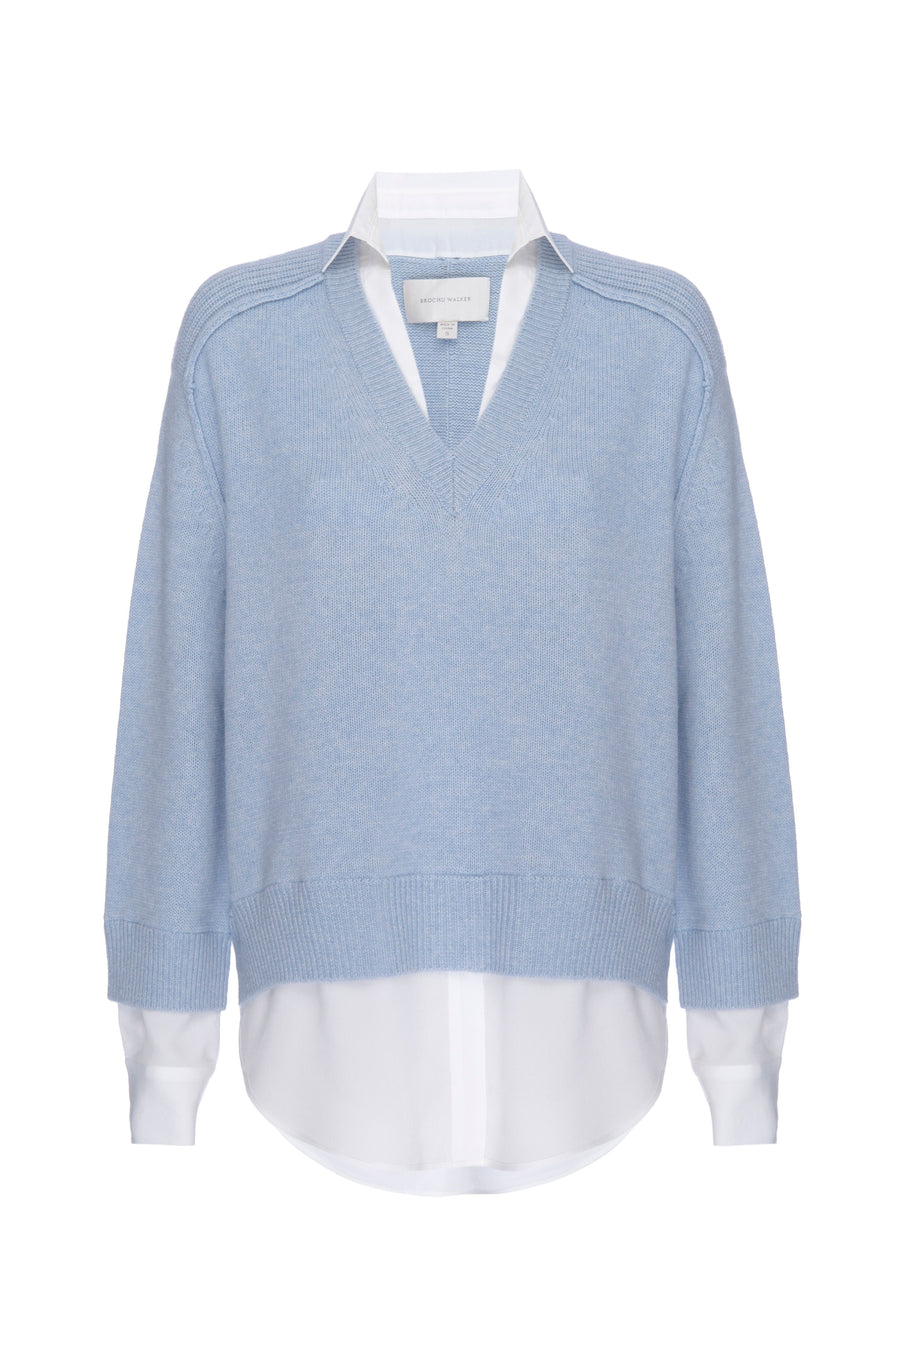 Looker light blue layered v-neck sweater flat view